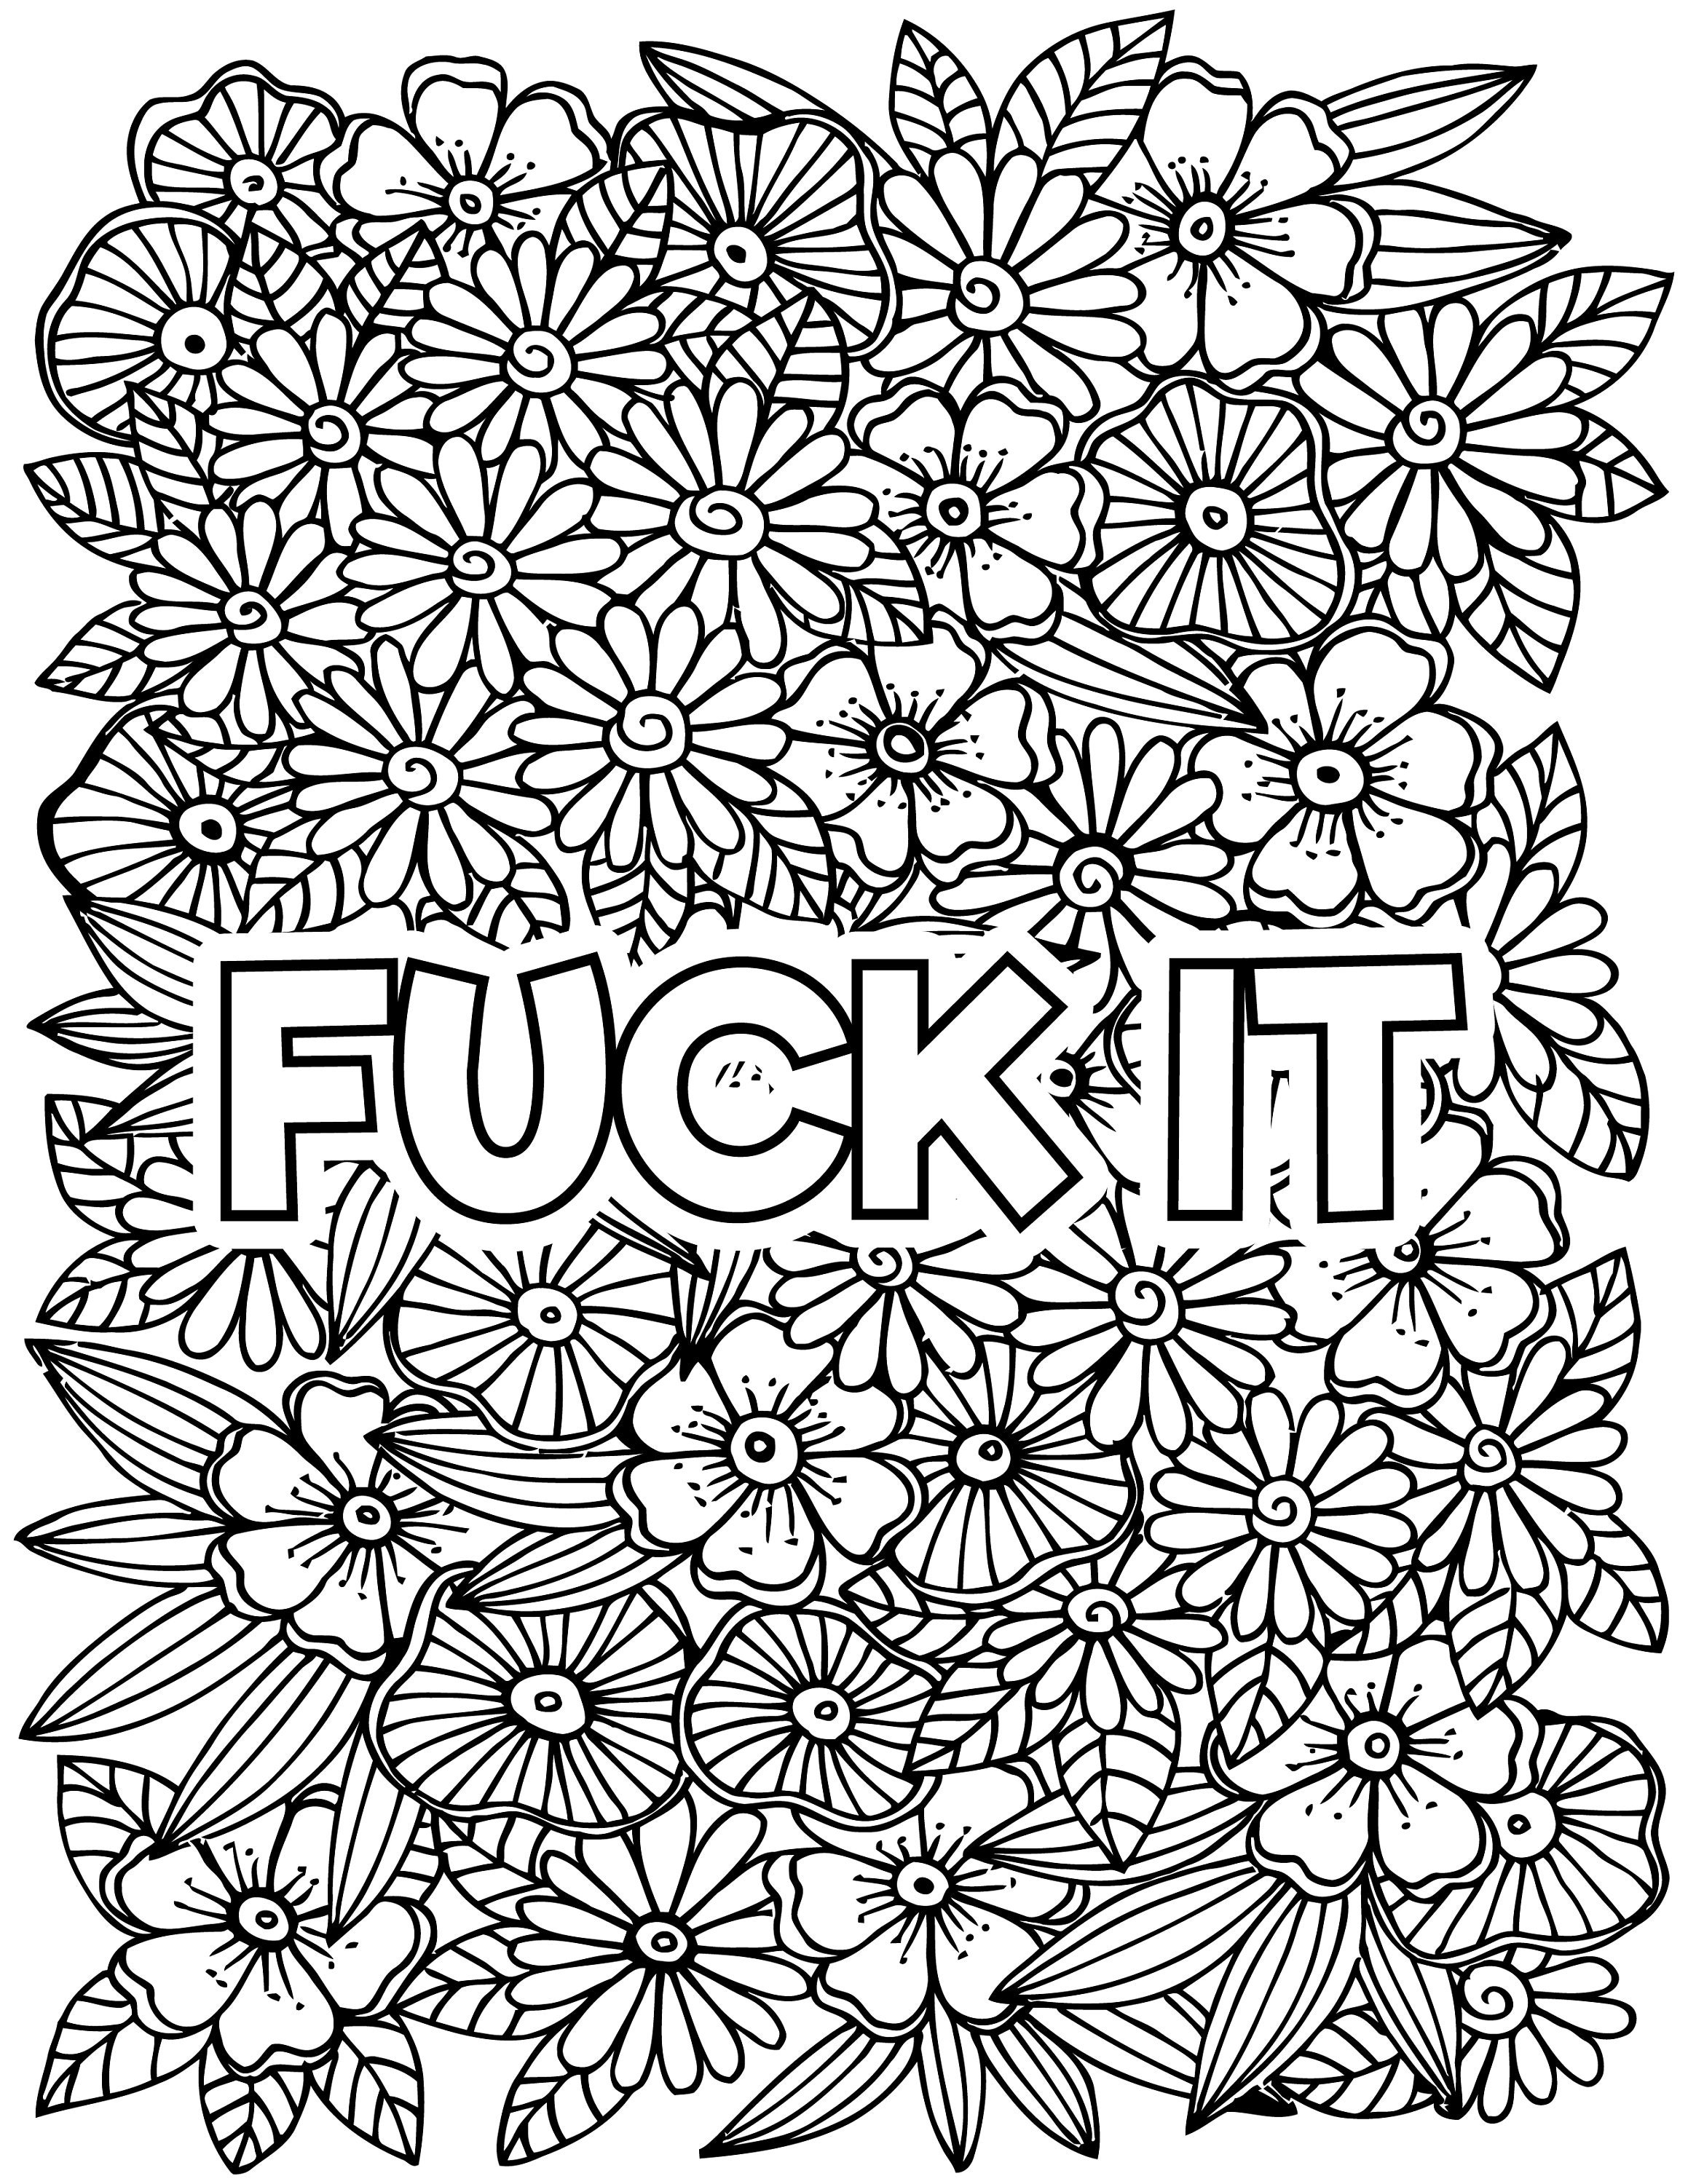 Swear Words Coloring Book - Color Your Stress Away